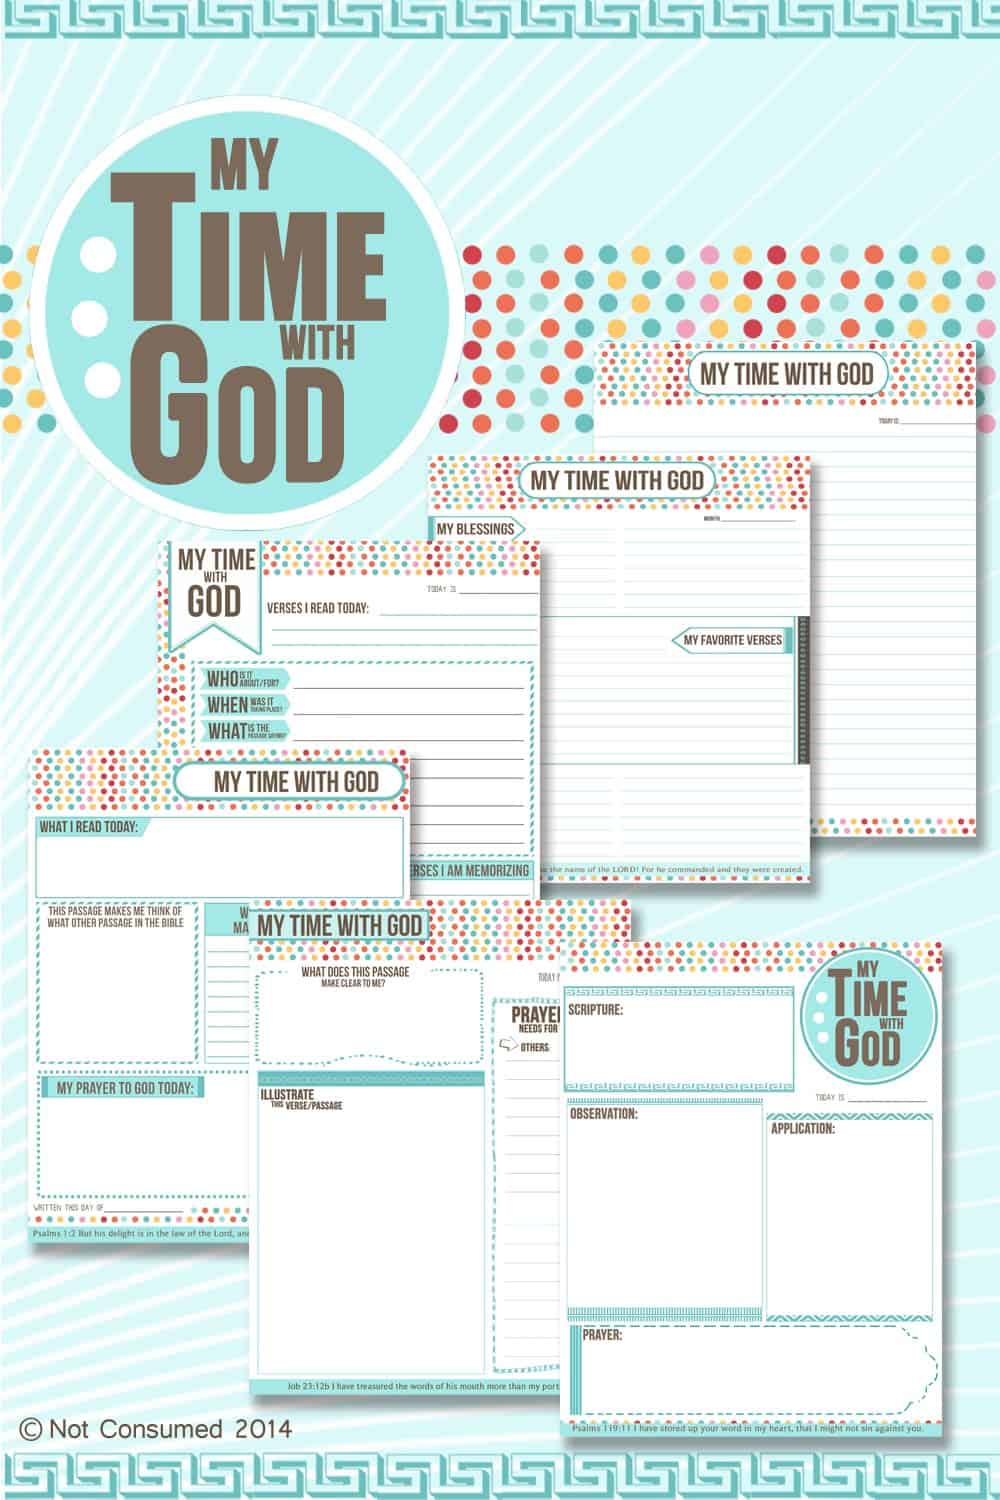 Are you looking for ways to encourage your children to have a better, more consistent quiet time? My Time with God is a quiet time journal  for kids that has 4 unique study methods, prayer records, blessings and more! Make your mornings easier and your time with God sweeter!